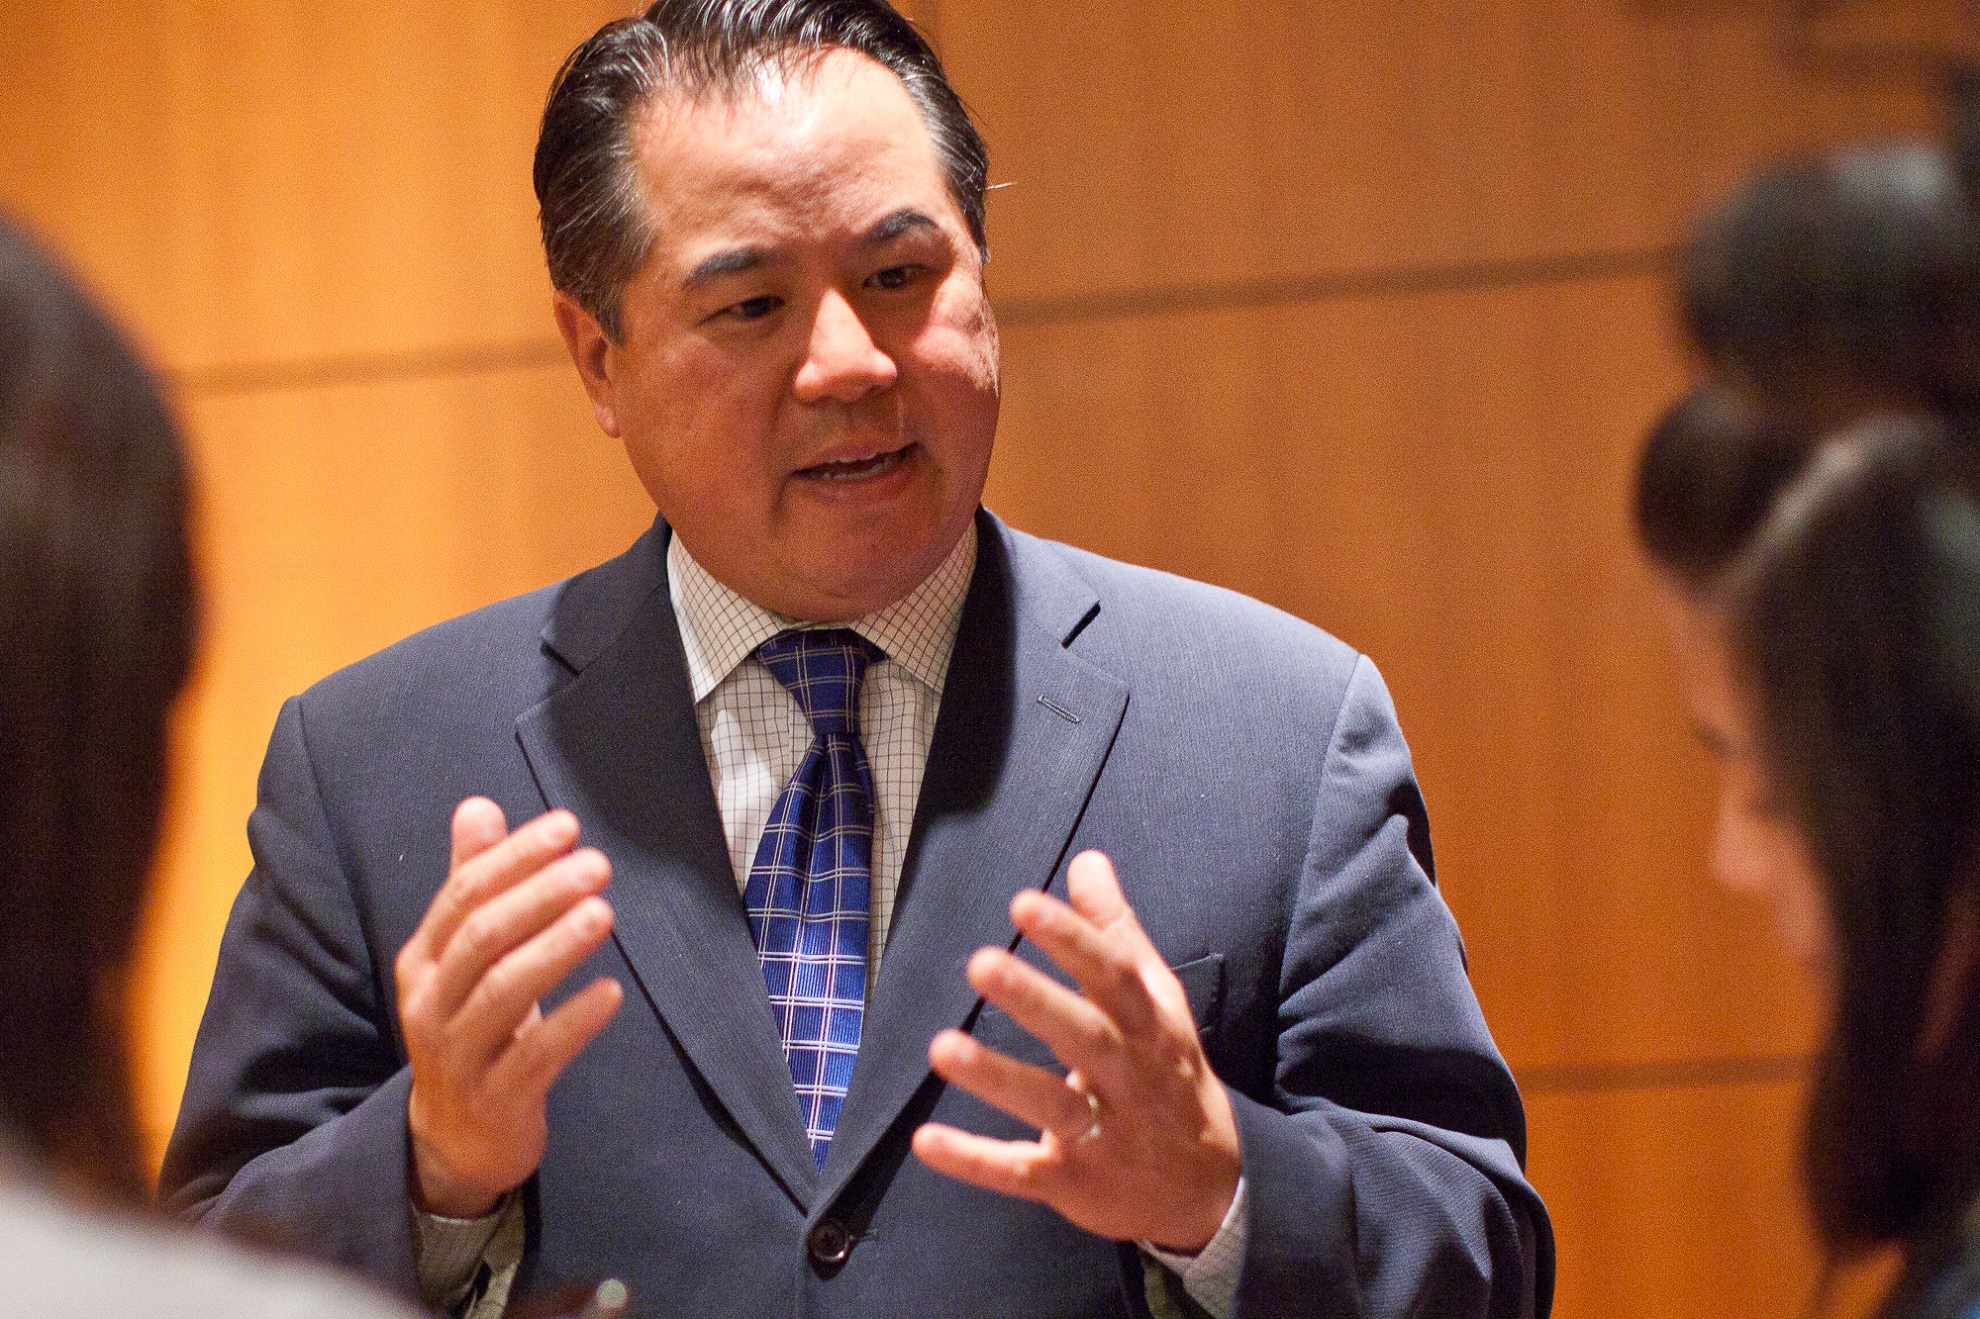 An Asian man with black hair combed back in a blue business suit is speaking with his hands.